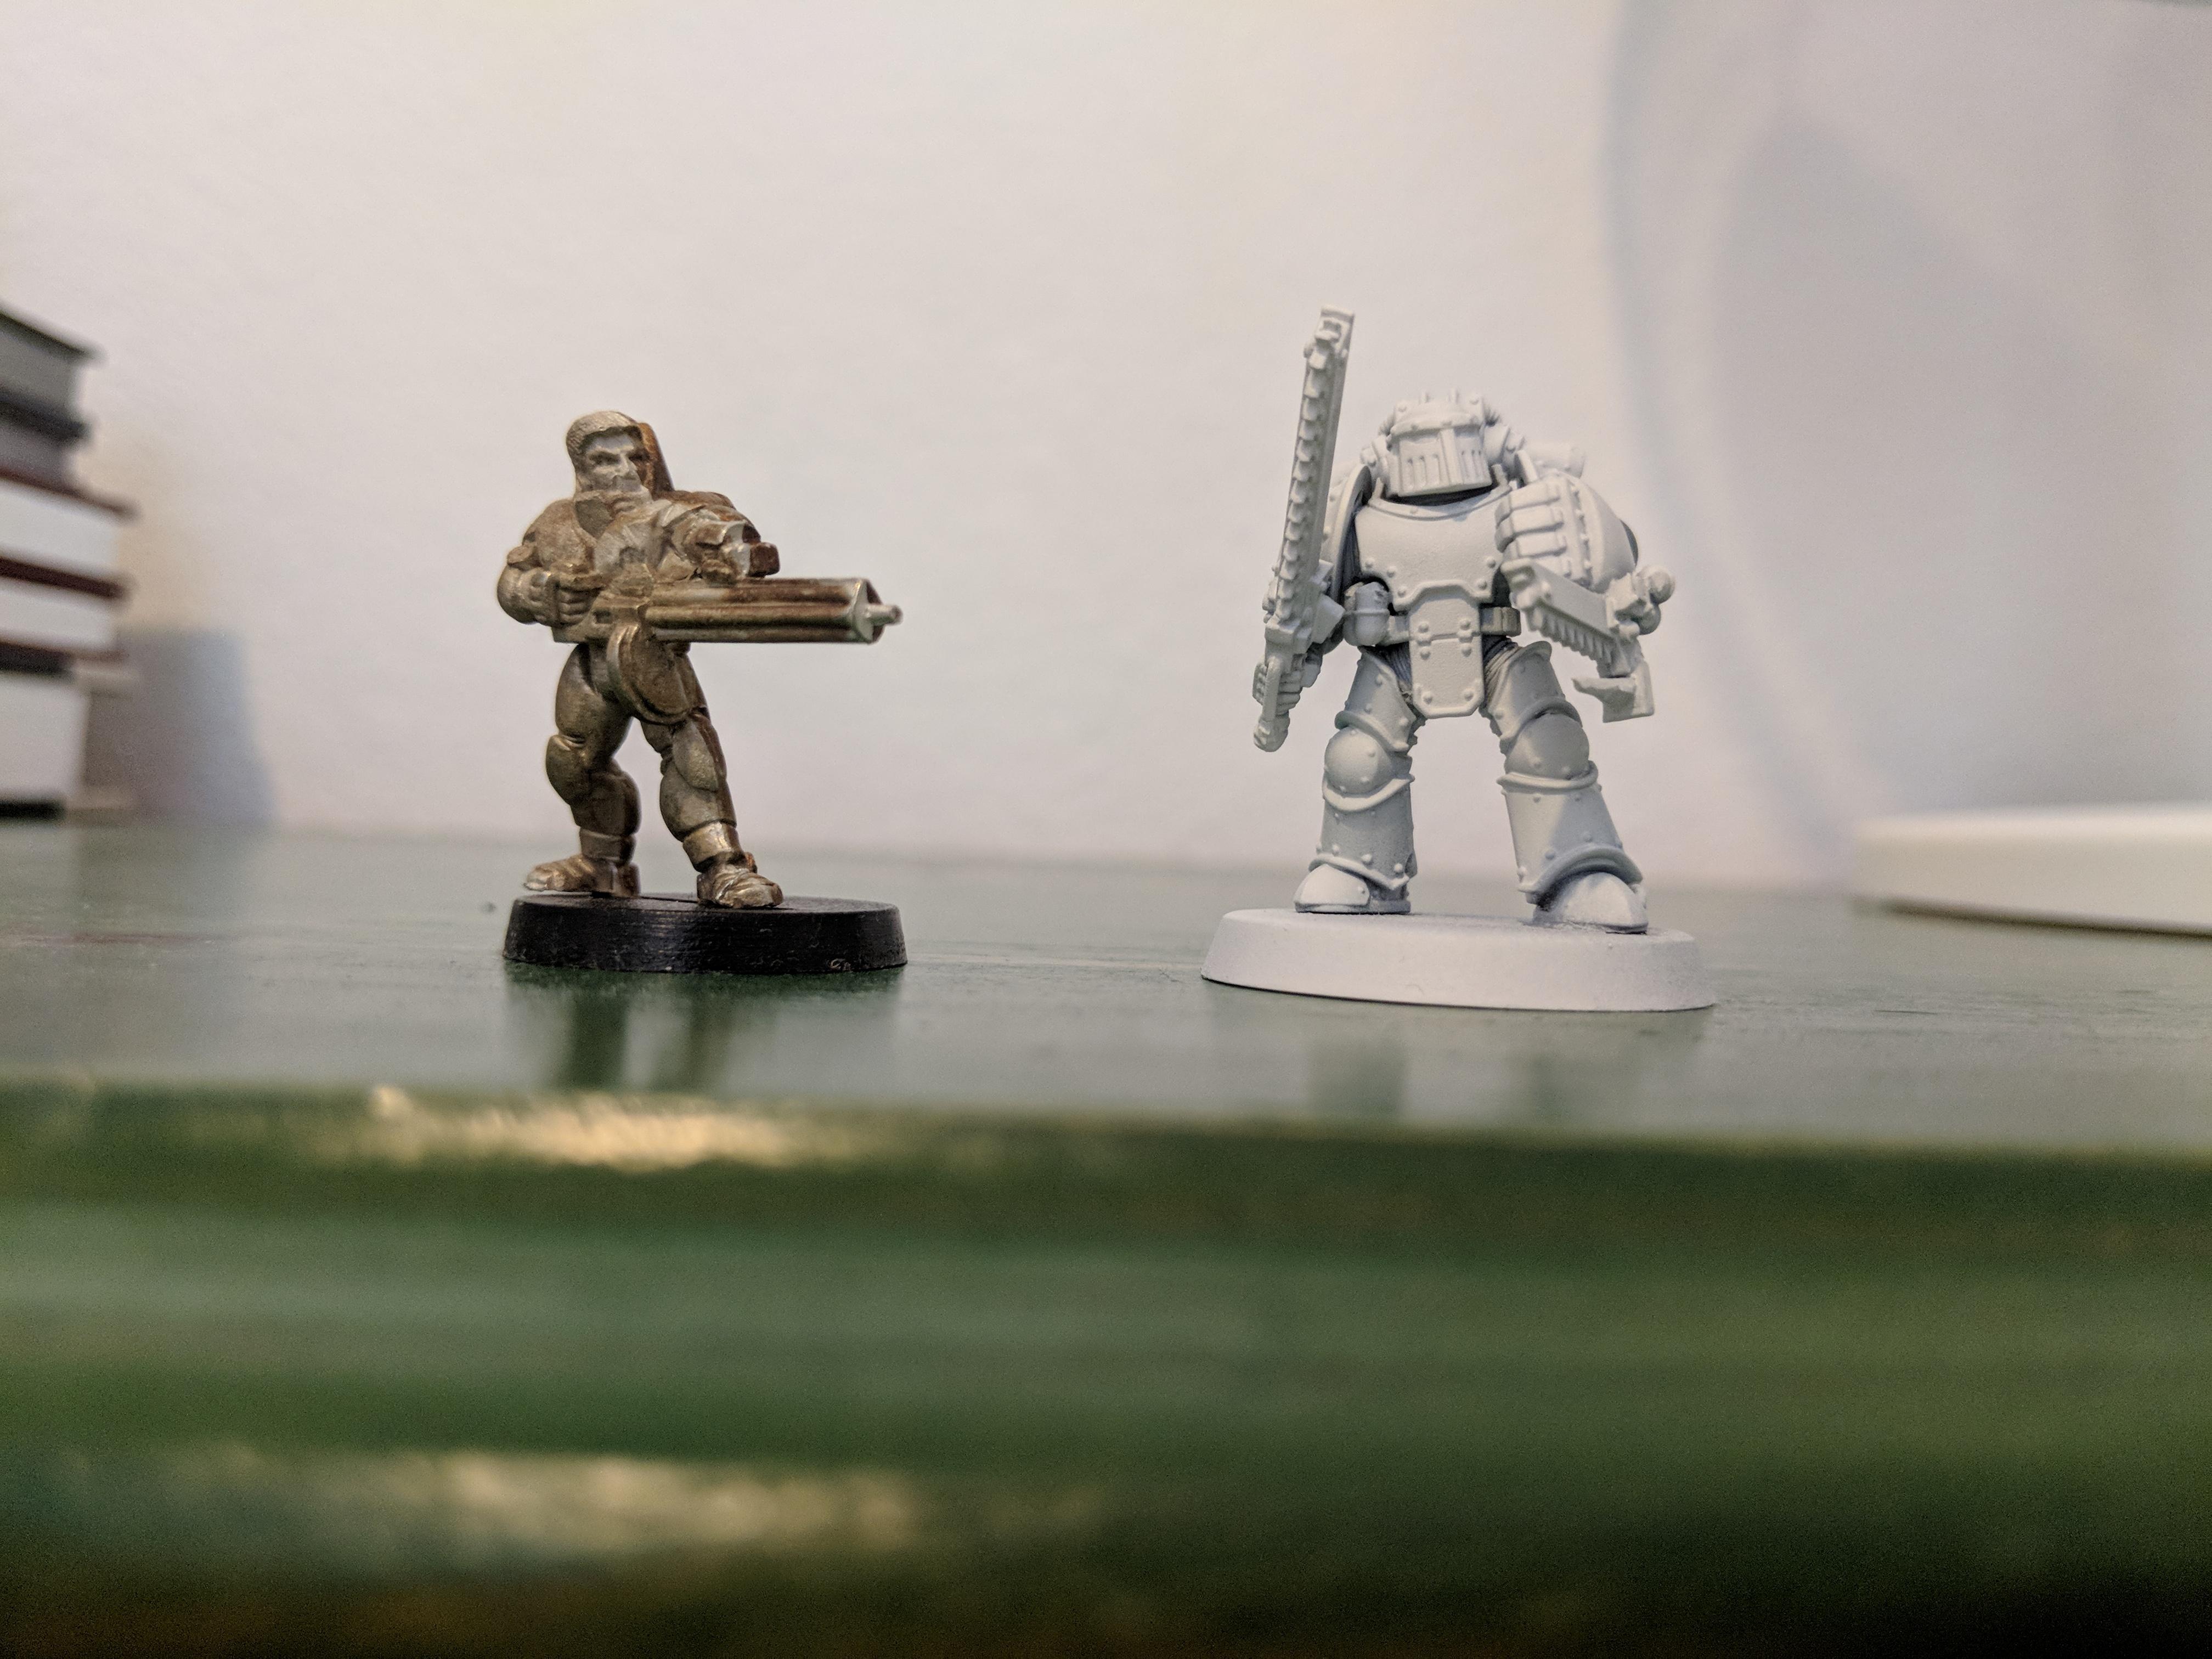 Comparison with a Space Marine